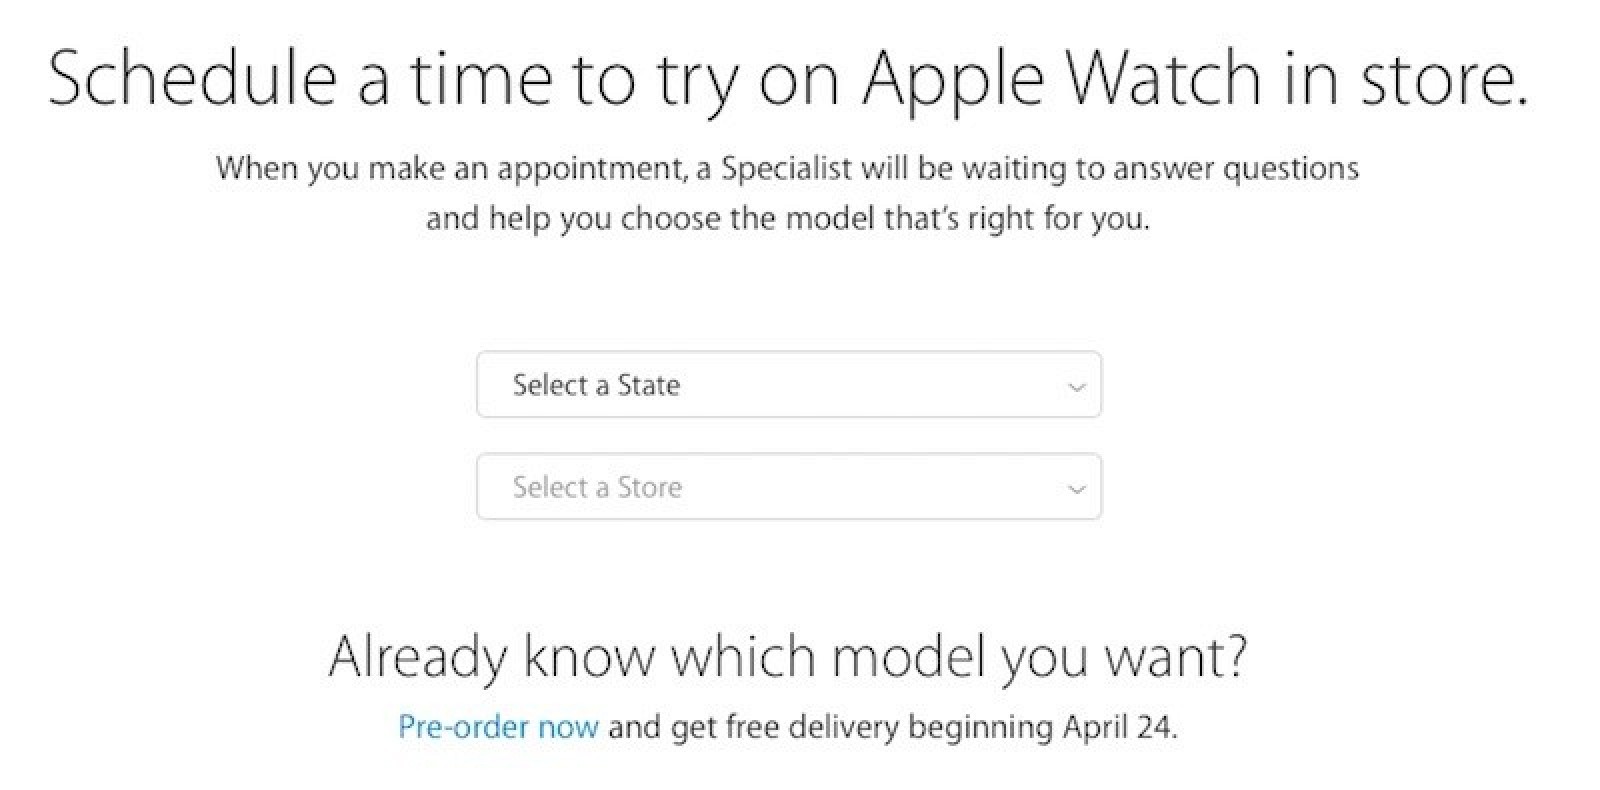 how to schedule an apple watch try-on appointment - macrumors